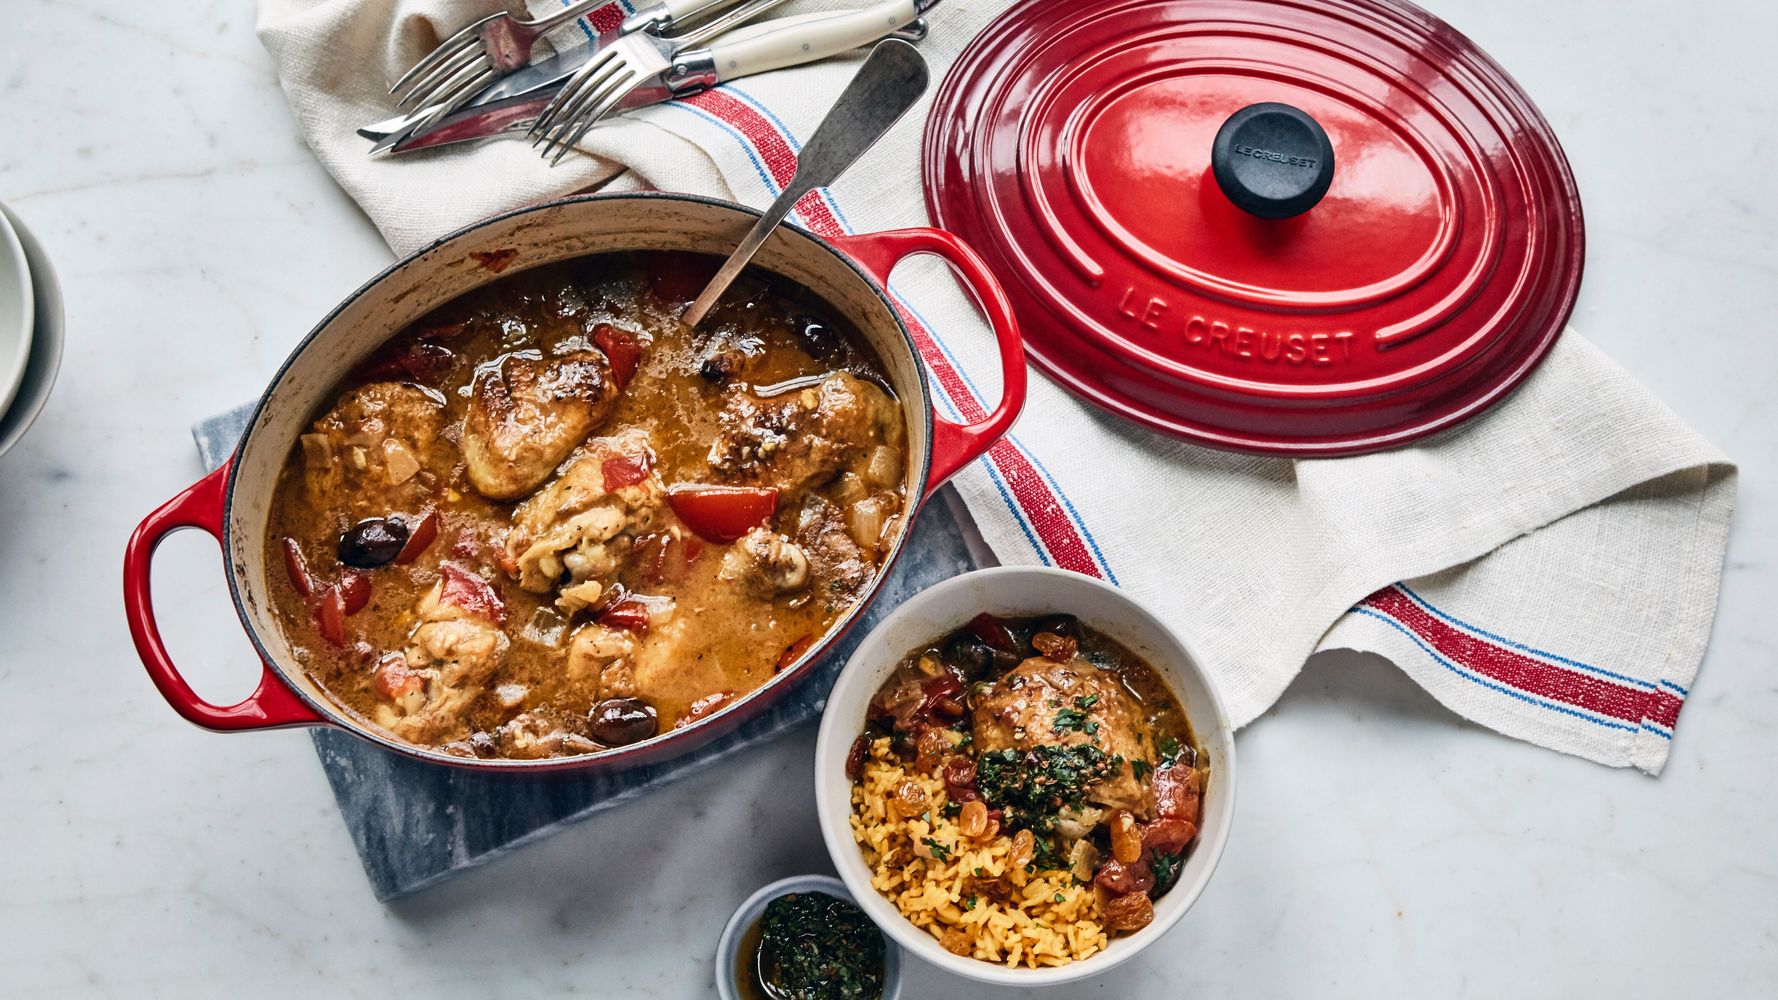 Cuisinart's Cast-Iron Dutch Ovens Are More Than Half Off Right Now